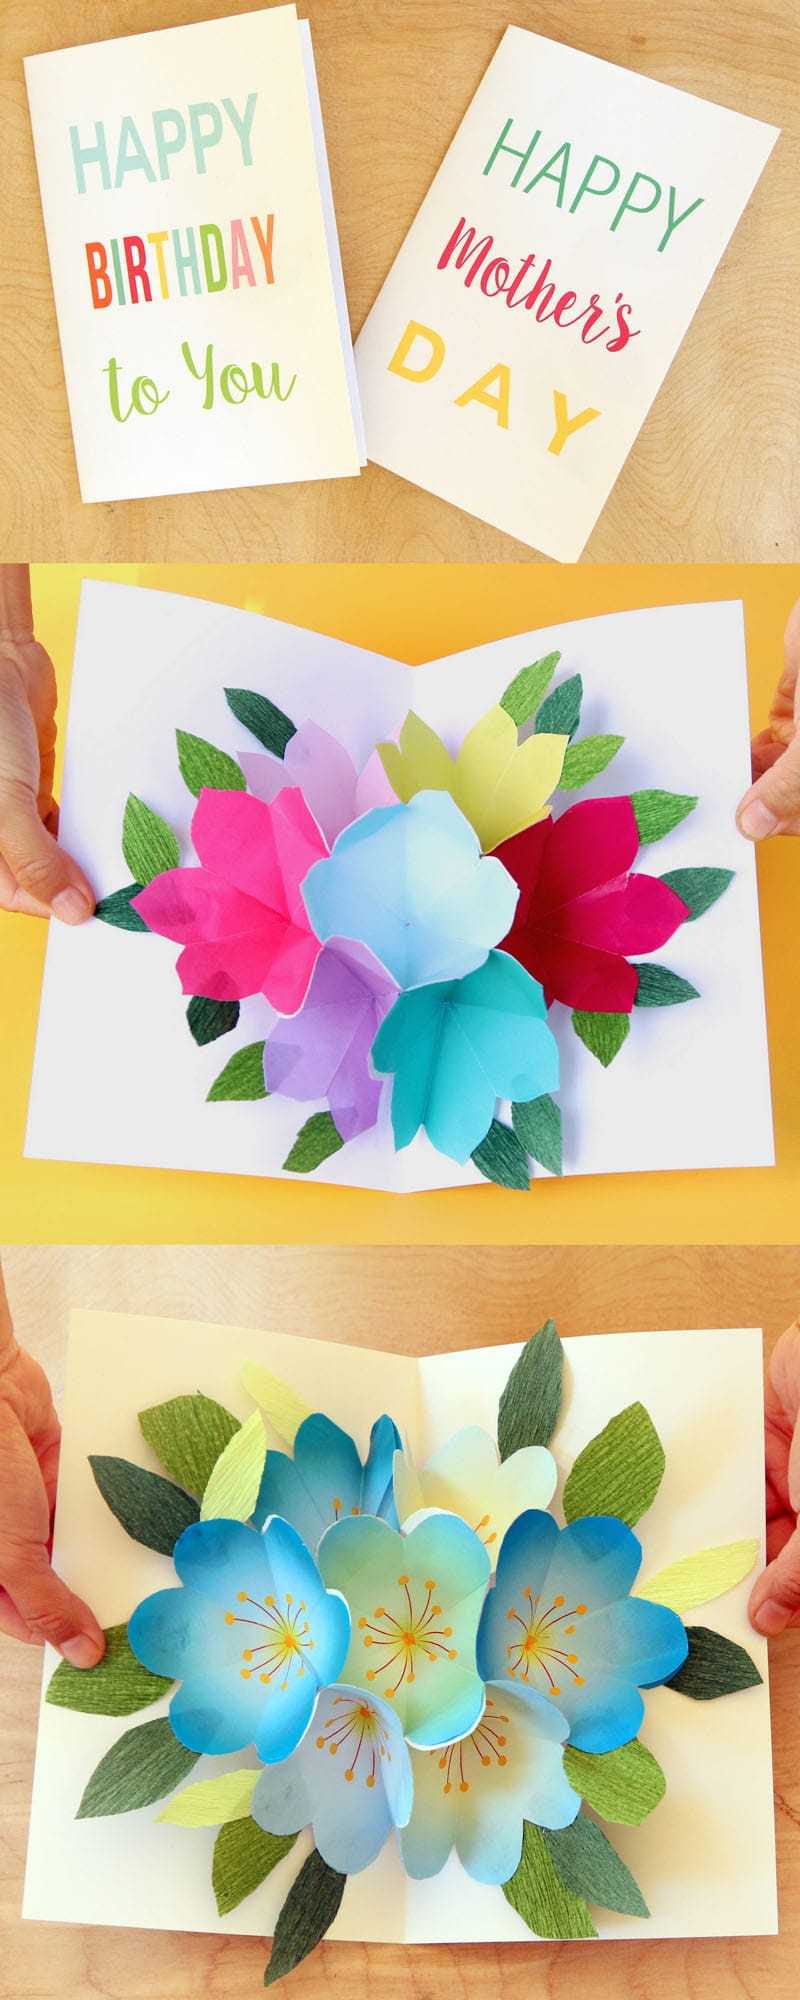 Free Printable Happy Birthday Card With Pop Up Bouquet – A Intended For Printable Pop Up Card Templates Free